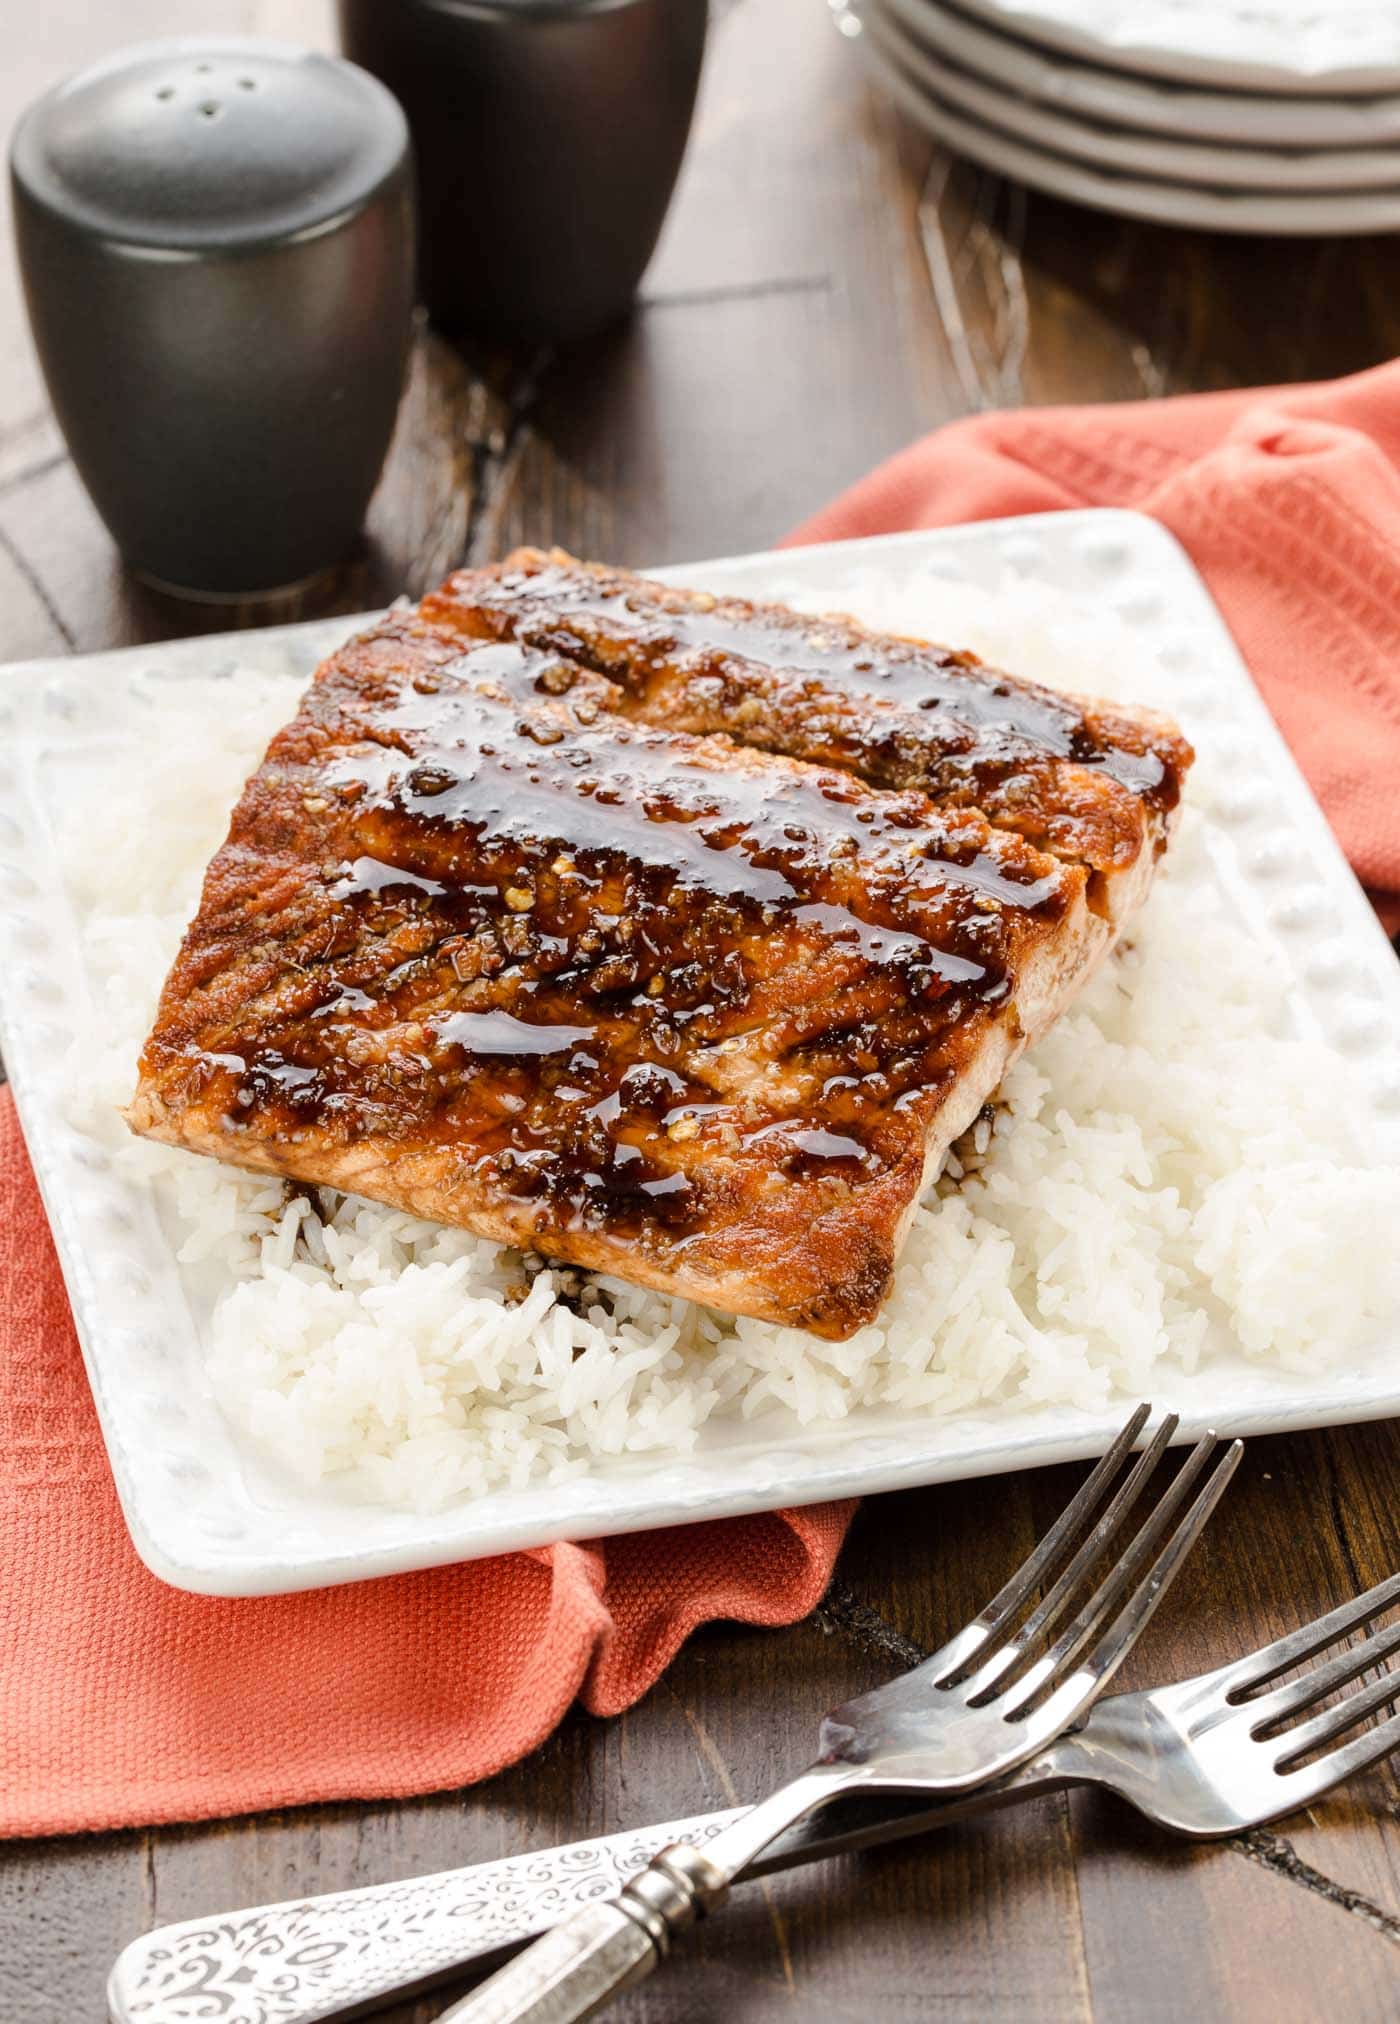 Salmon with glaze on rice on white plate.